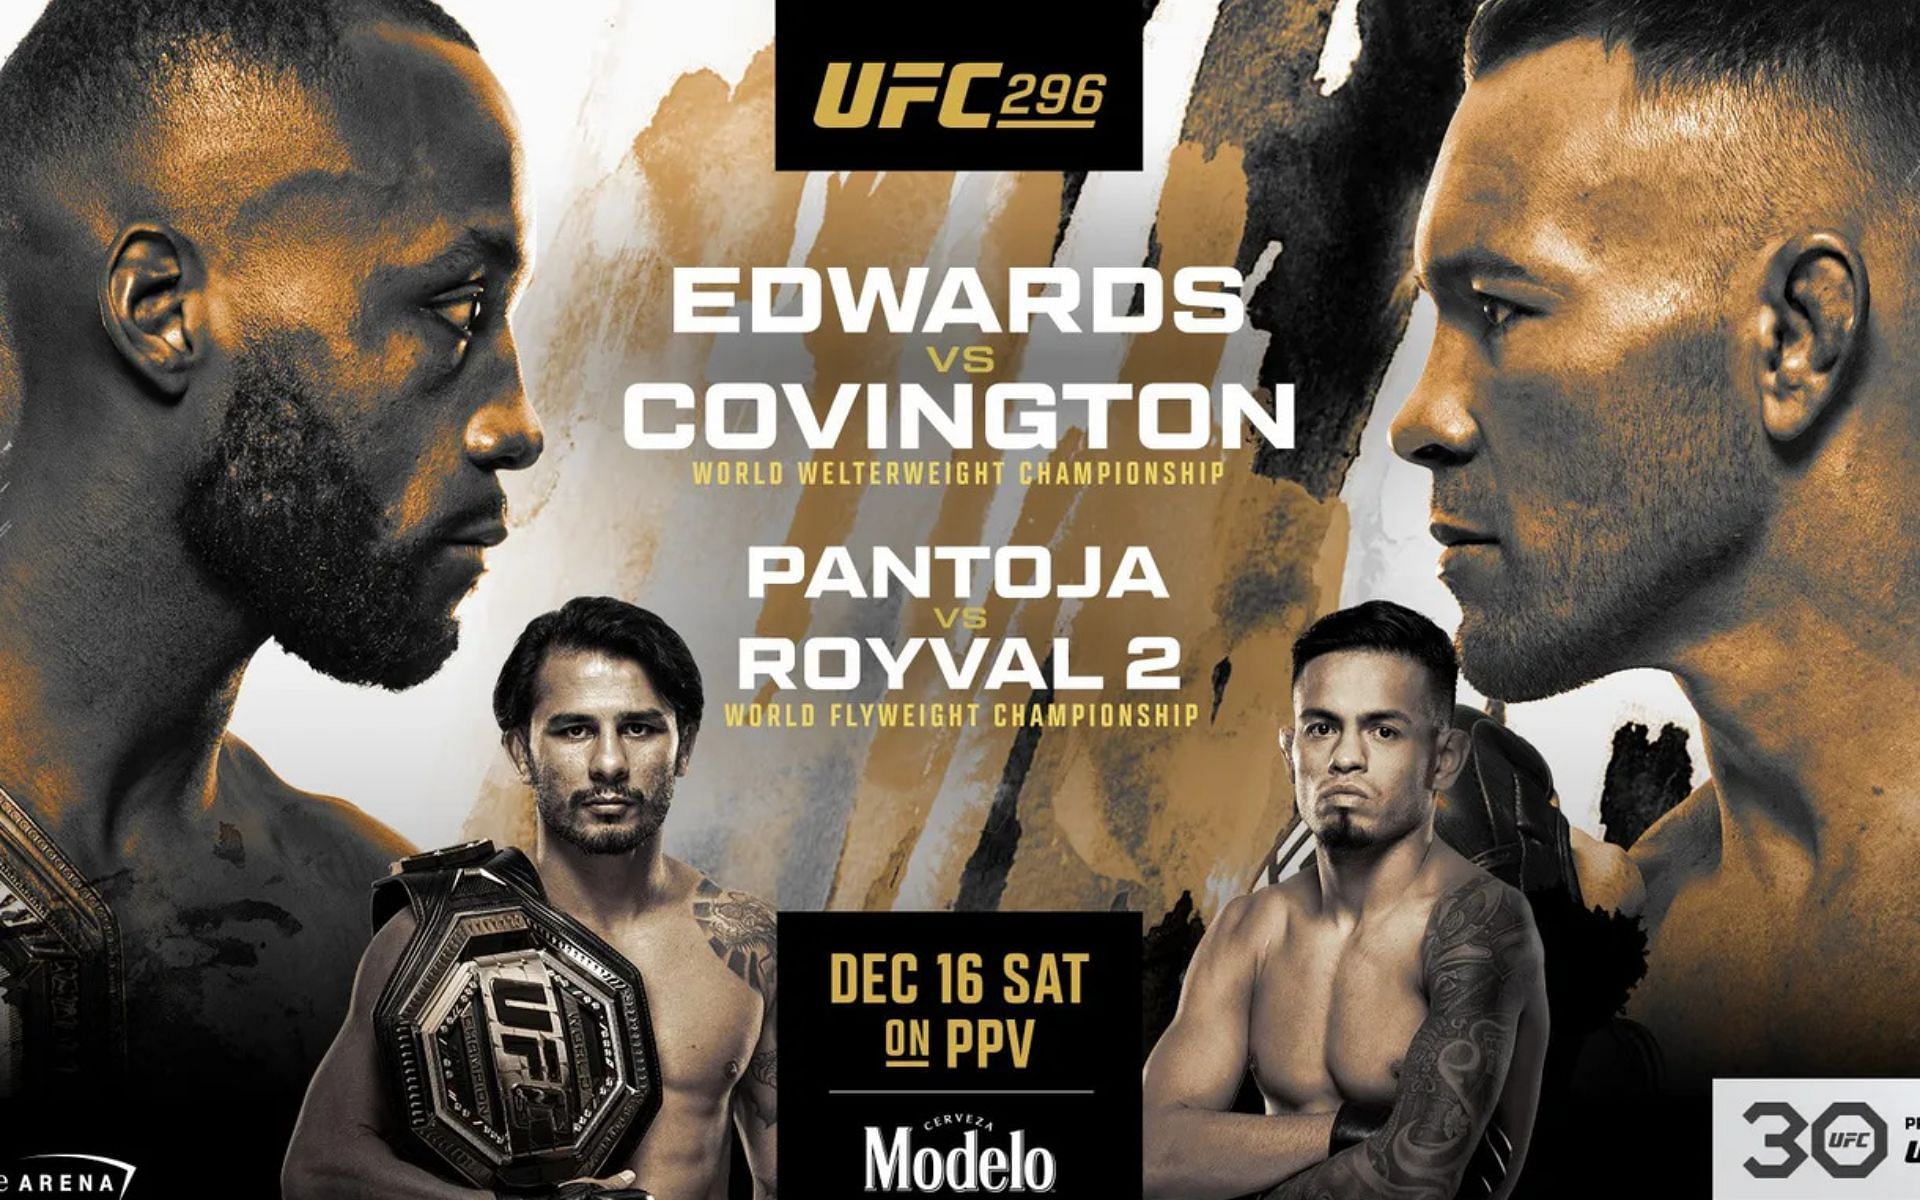 UFC 296 ceremonial weigh-in set to take place on Friday